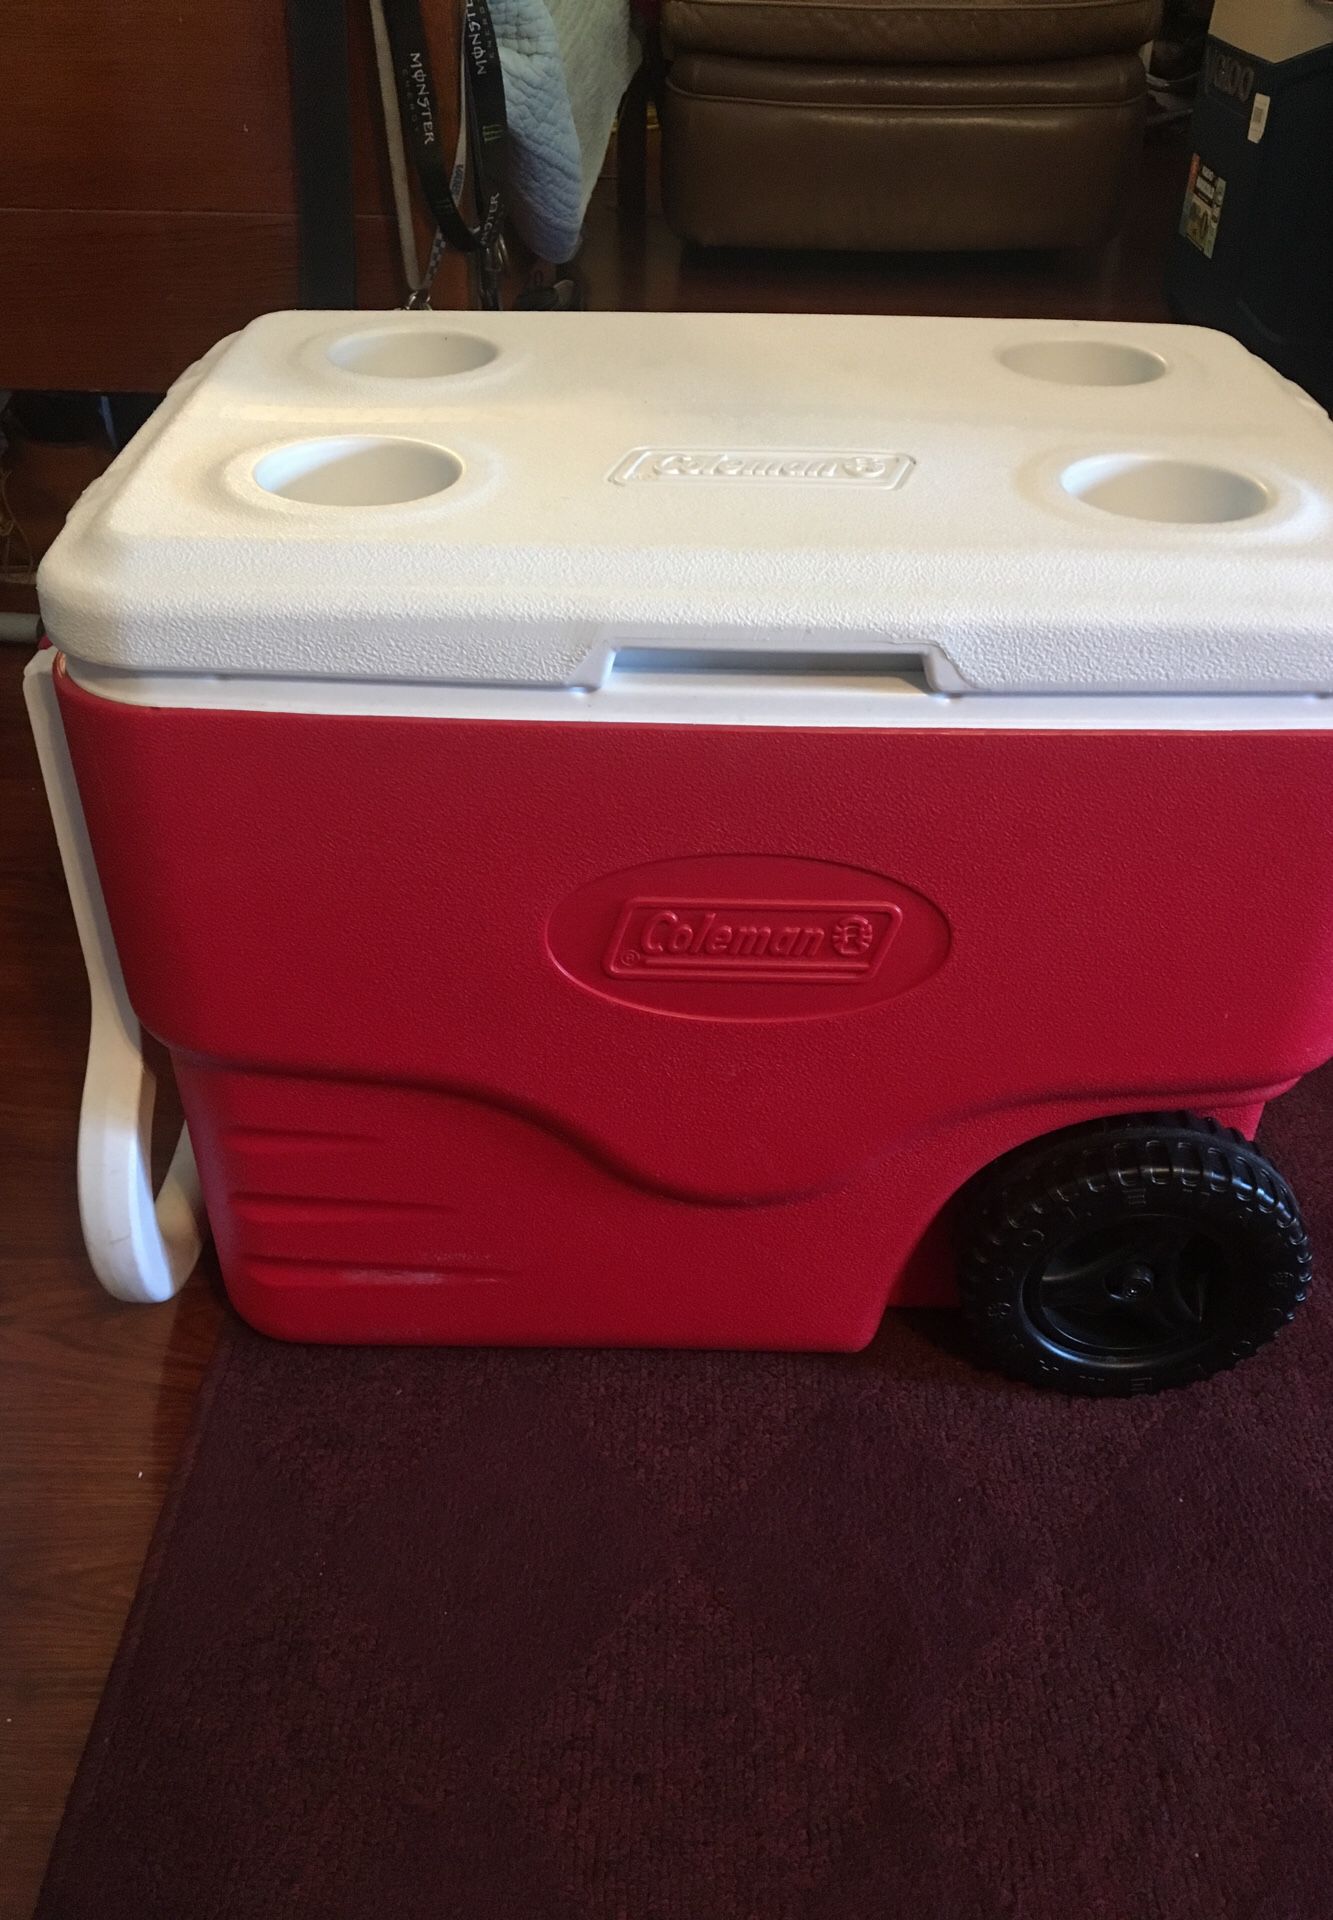 Coleman cooler with handle and wheels